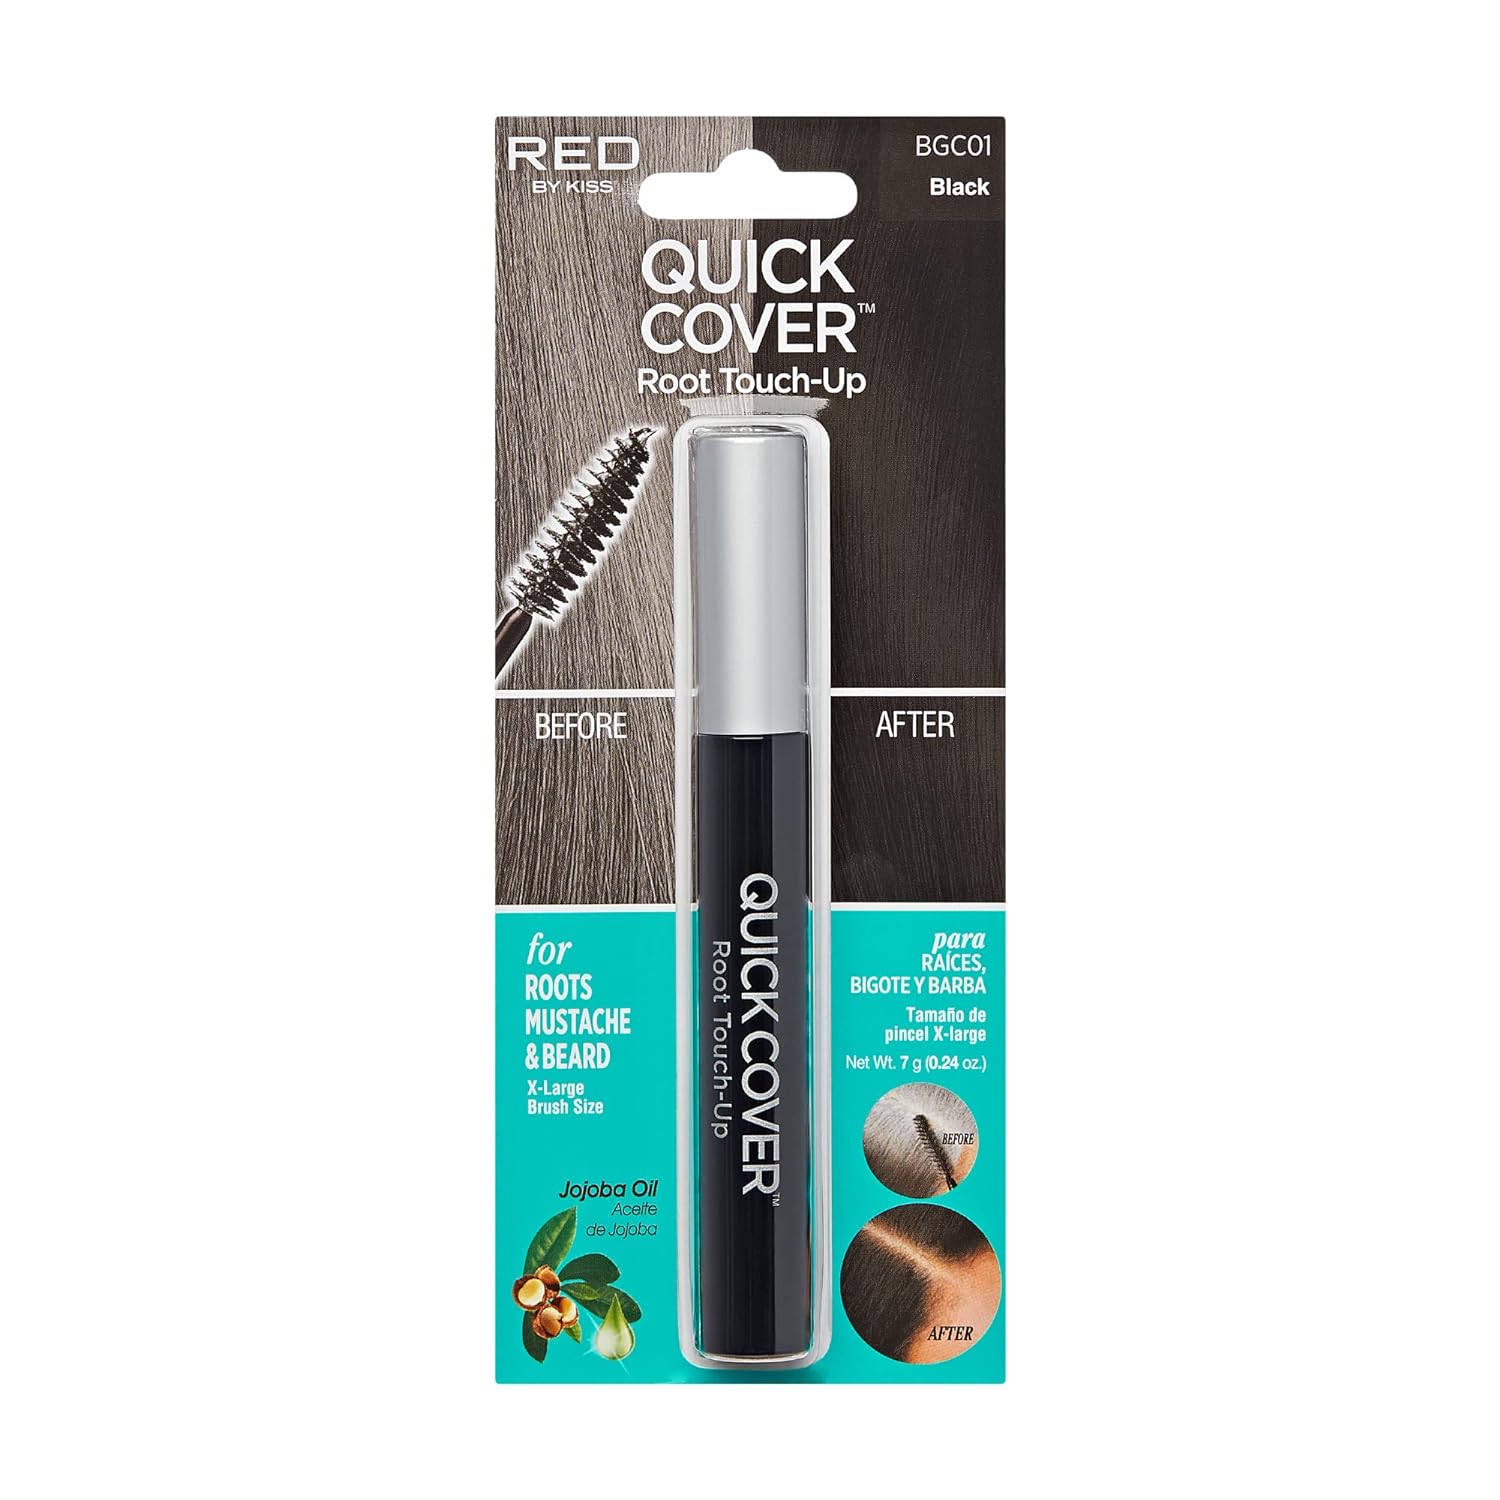 RED by Kiss Quick Cover Root Touch Up Mascara Water-Resistant Temporary Gray Concealer Cover Up Brush for Hair and Beard